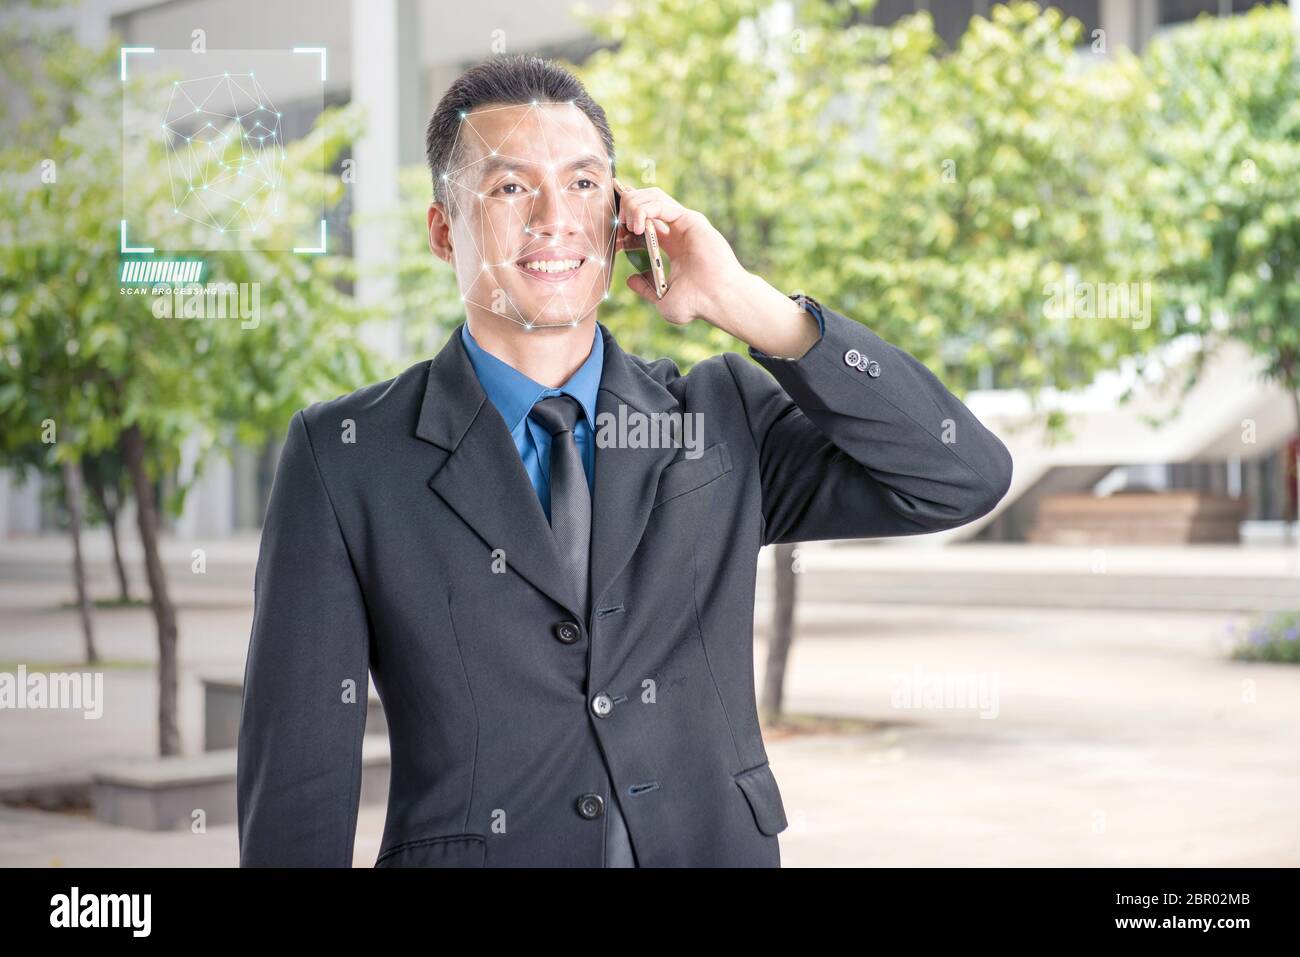 Smiling asian businessman with mobile phone using face recognition over outdoor background. Modern technology concept Stock Photo